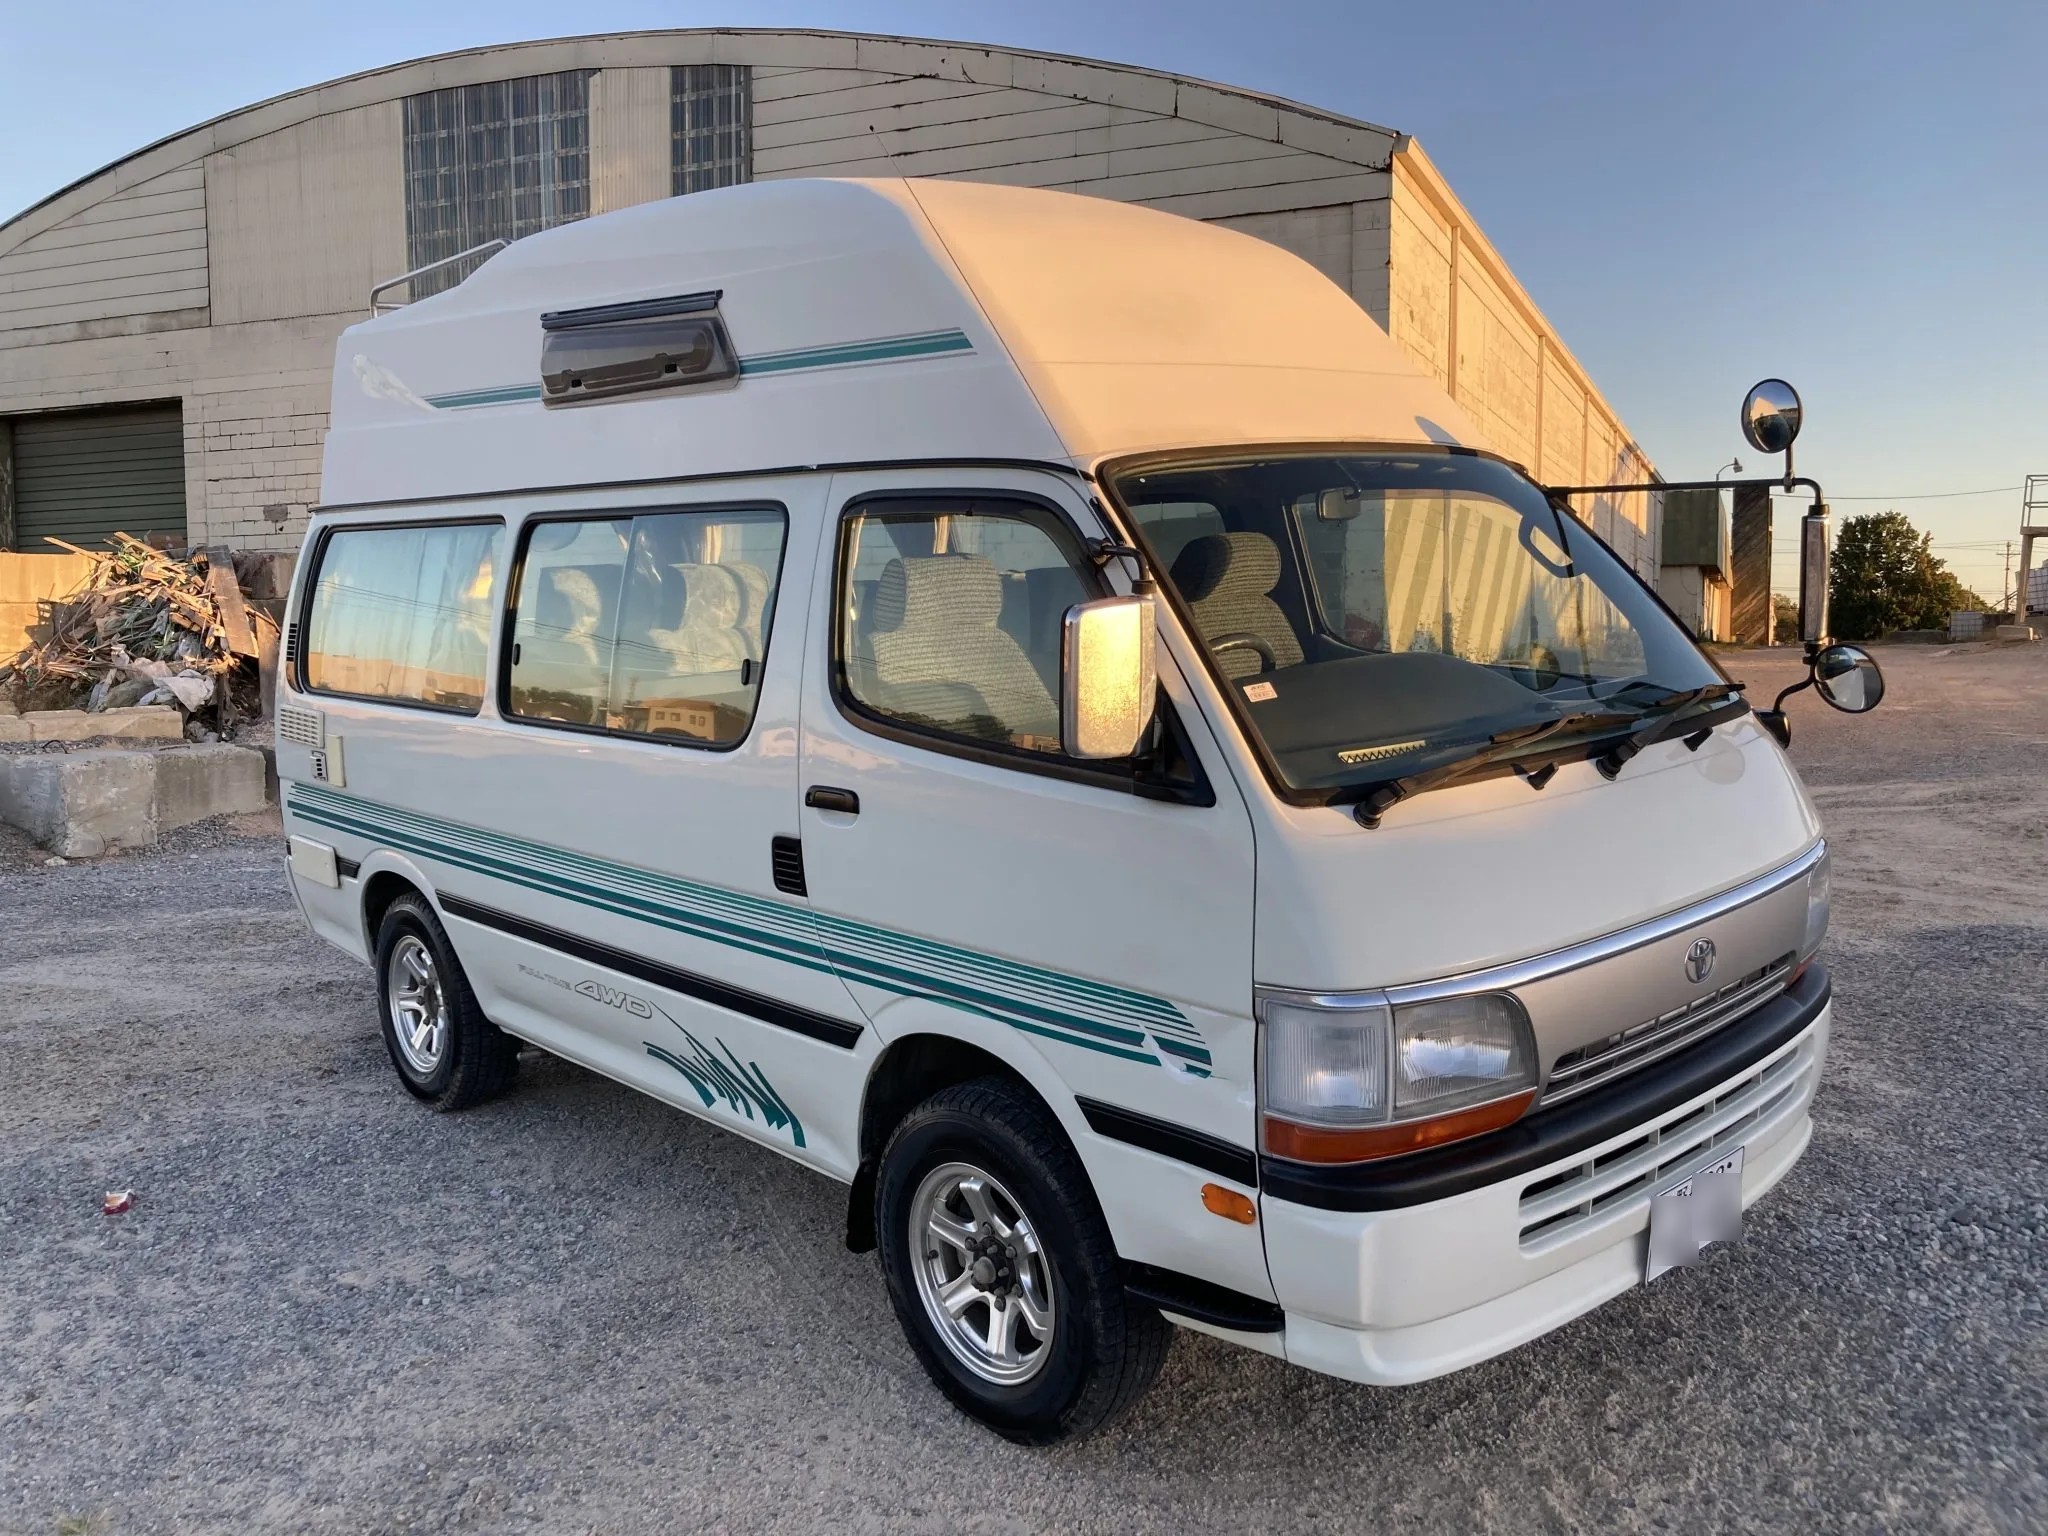 1996 Toyota HiAce 4WD Is the Finest JDM Camper, and It's Great as an  Overlander Too - autoevolution